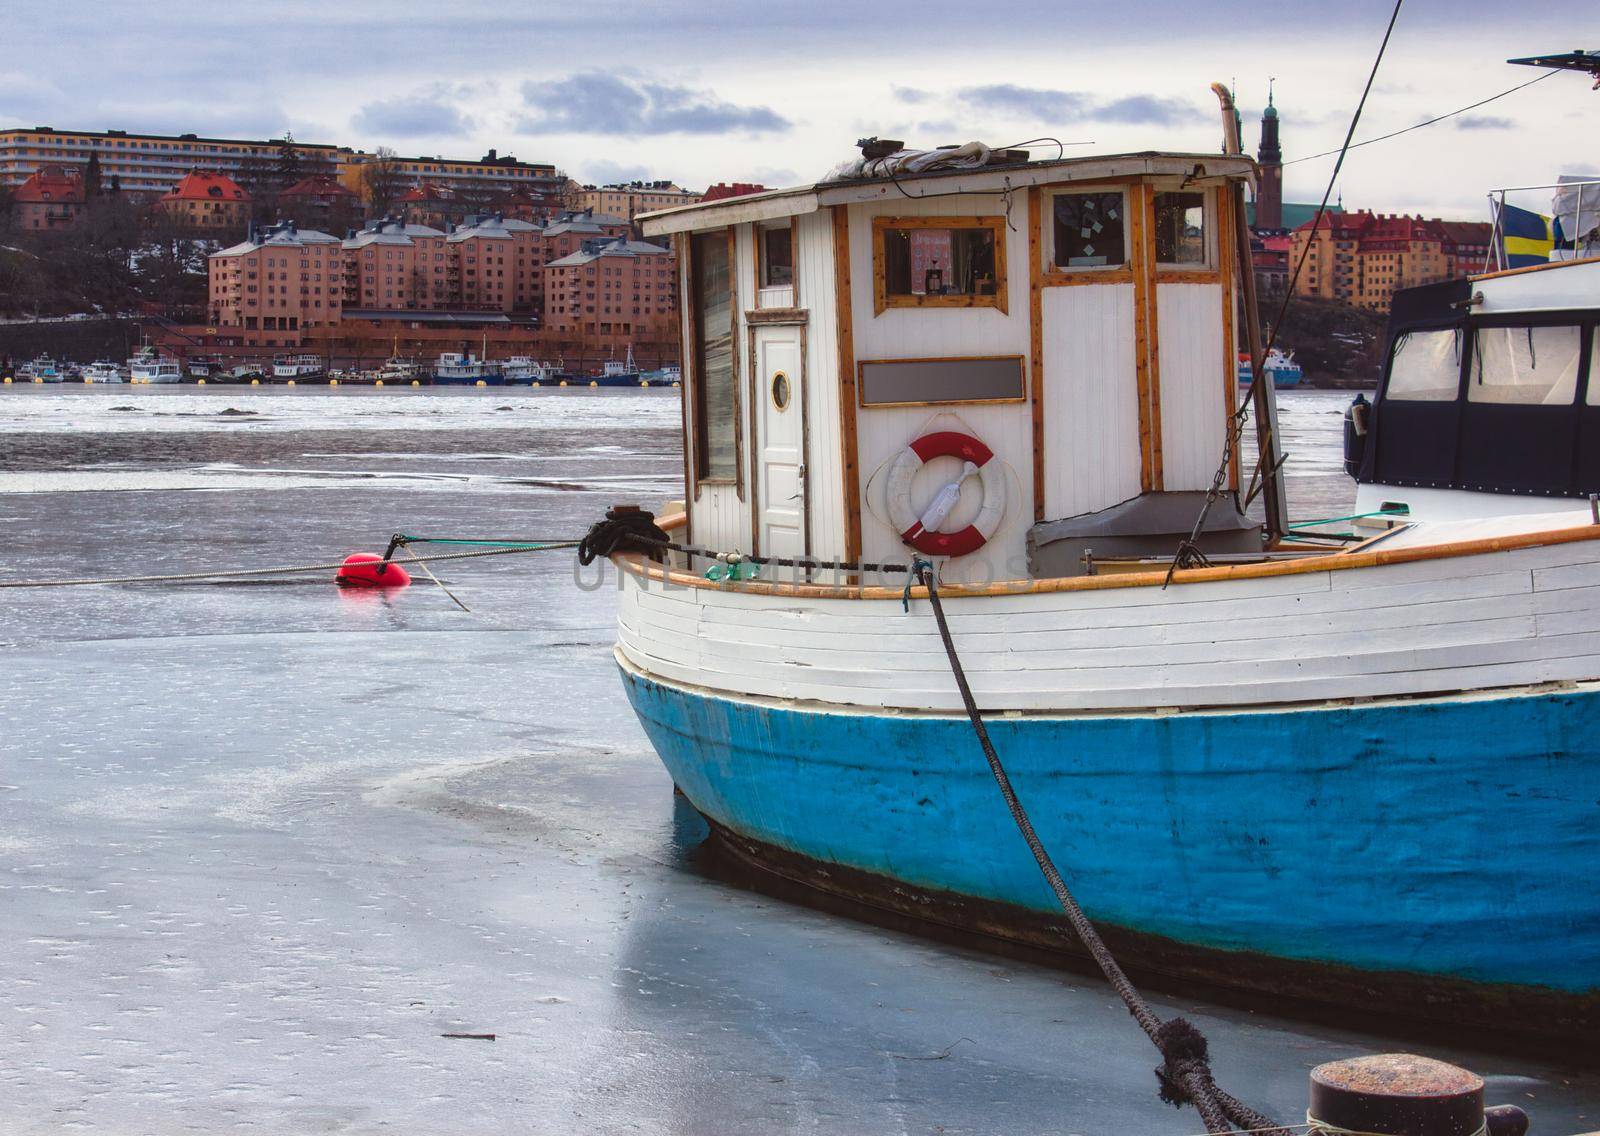 Small fishing boat with a blue hull moored on a frozen river in winter